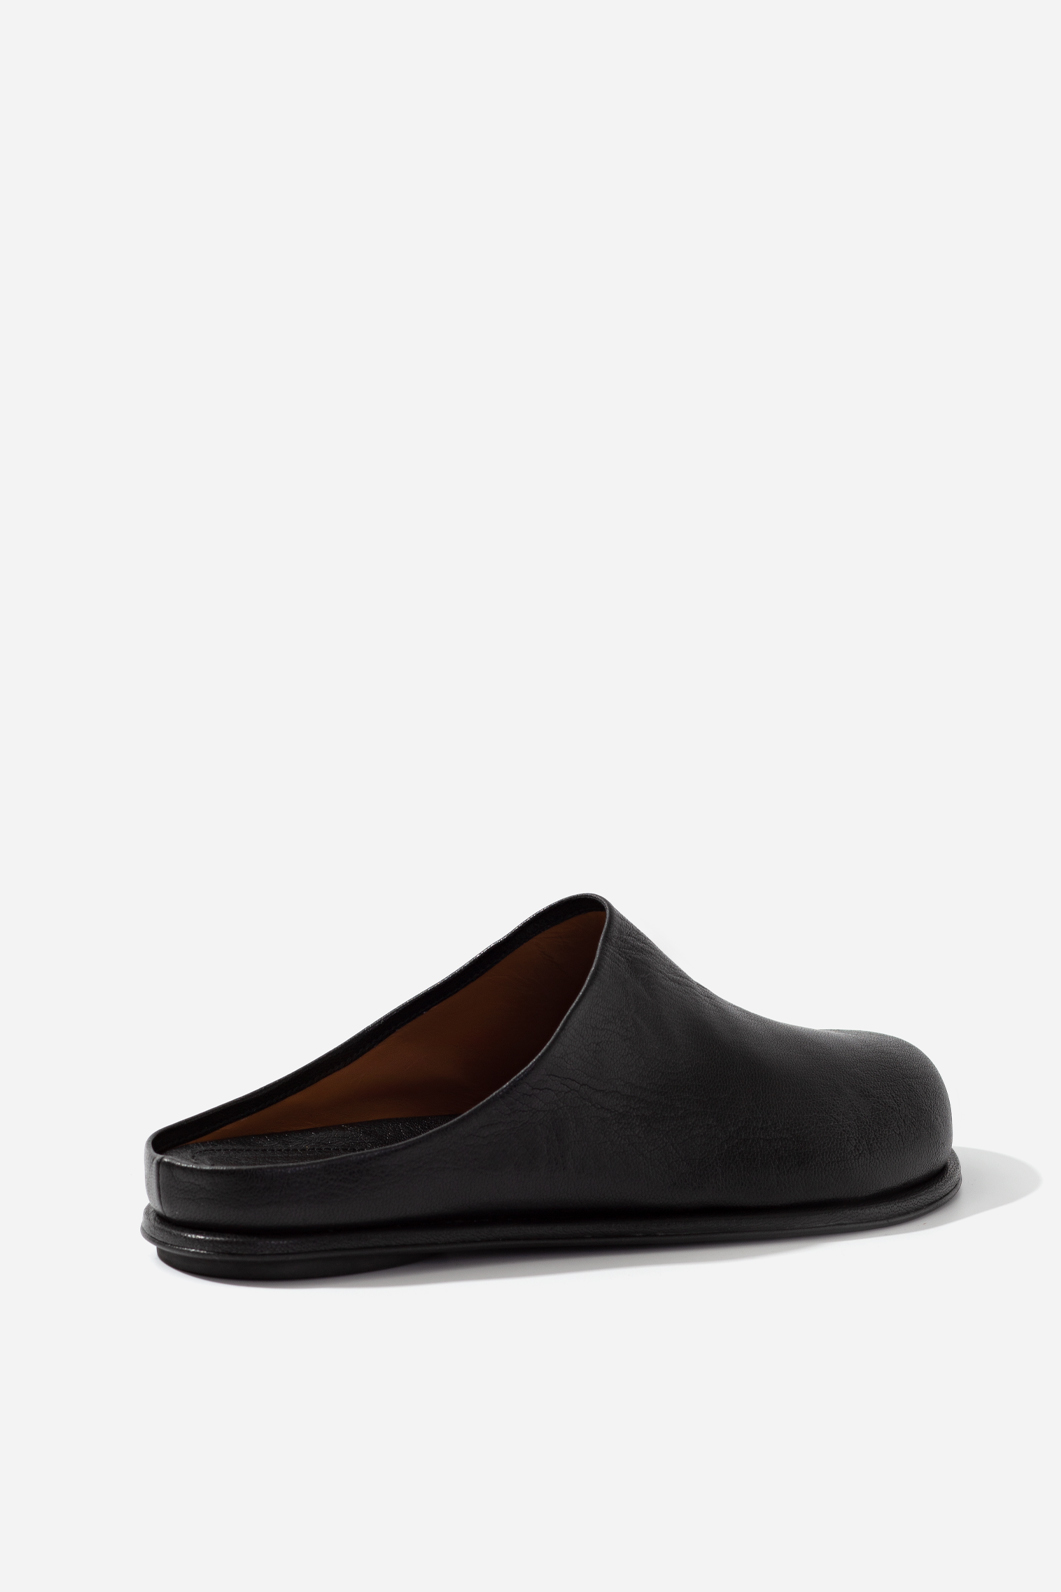 Claire black leather mules